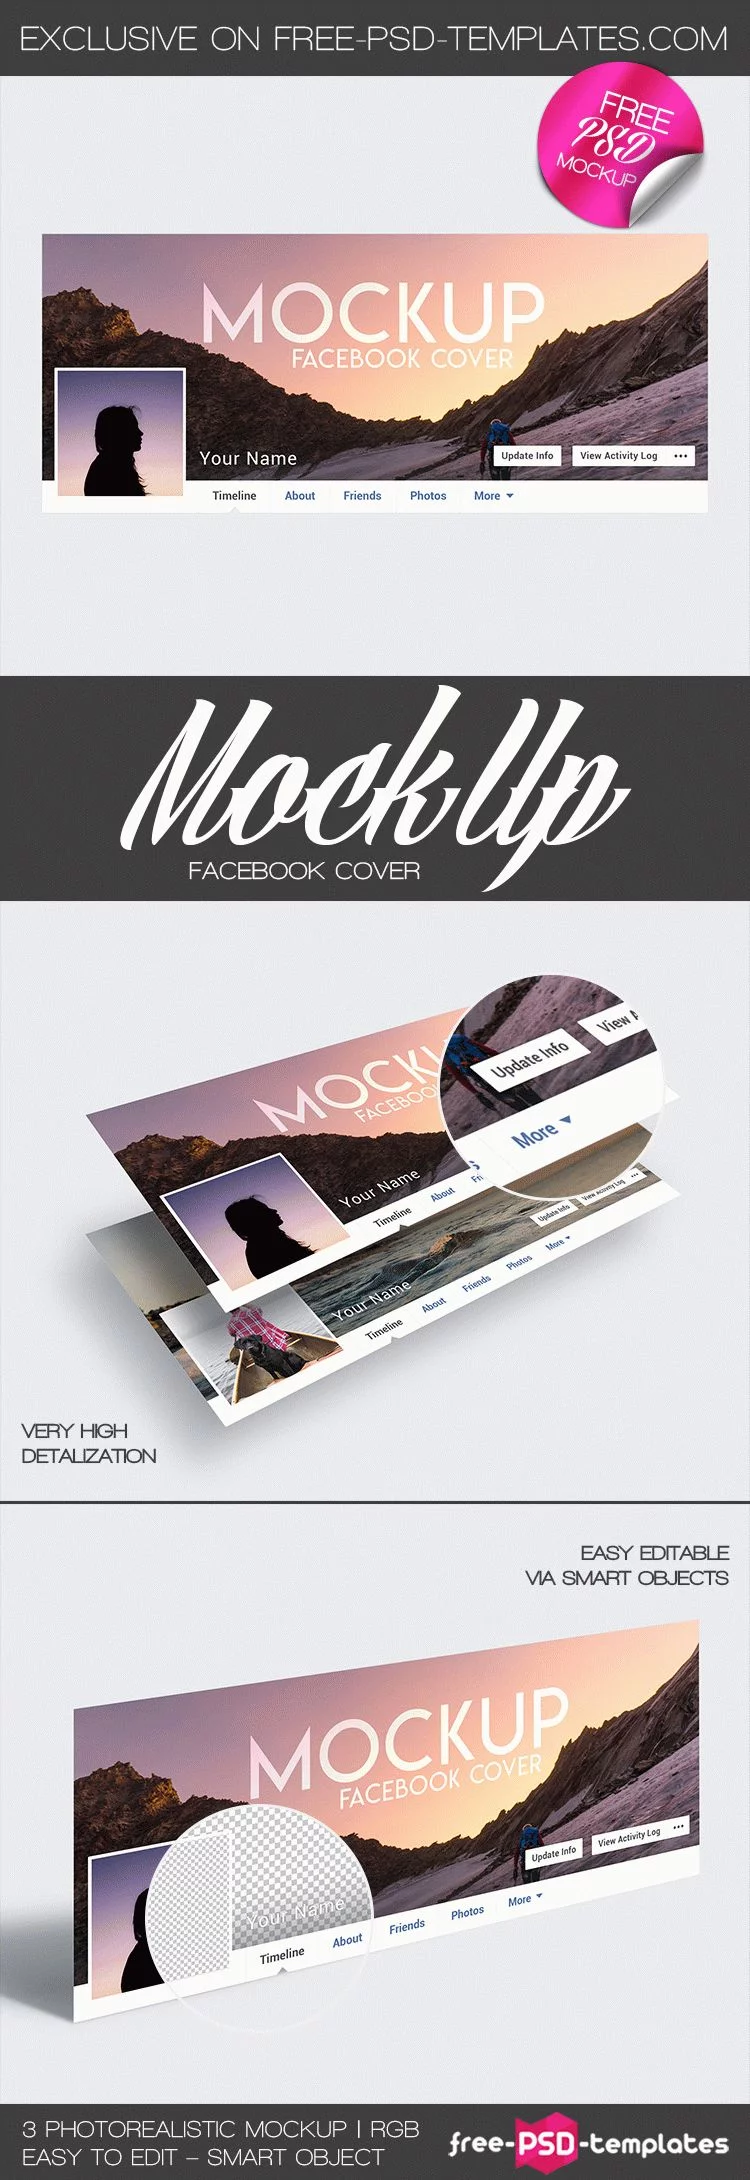 3 Free Facebook Cover Mock-ups in PSD